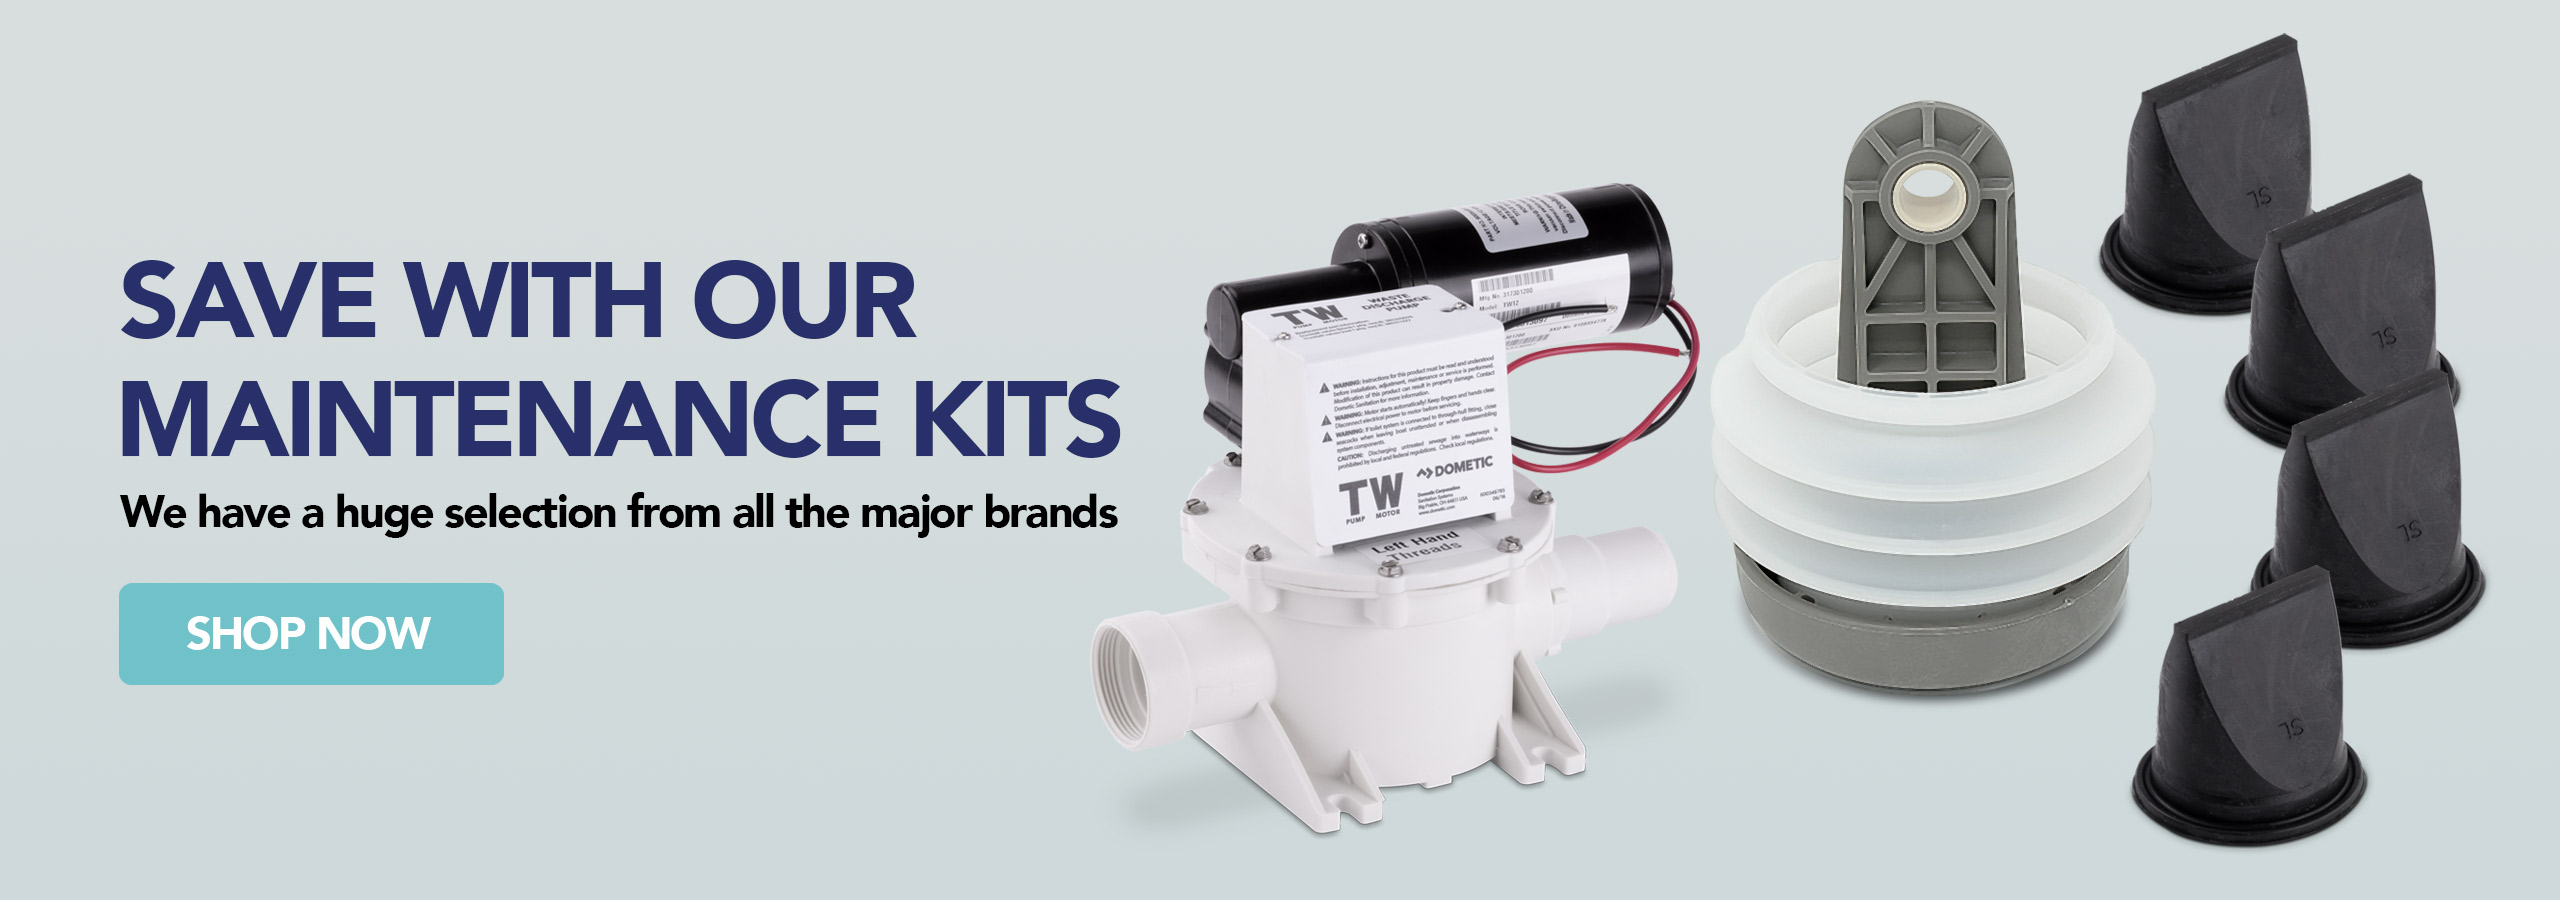 Save with our maintenance kits